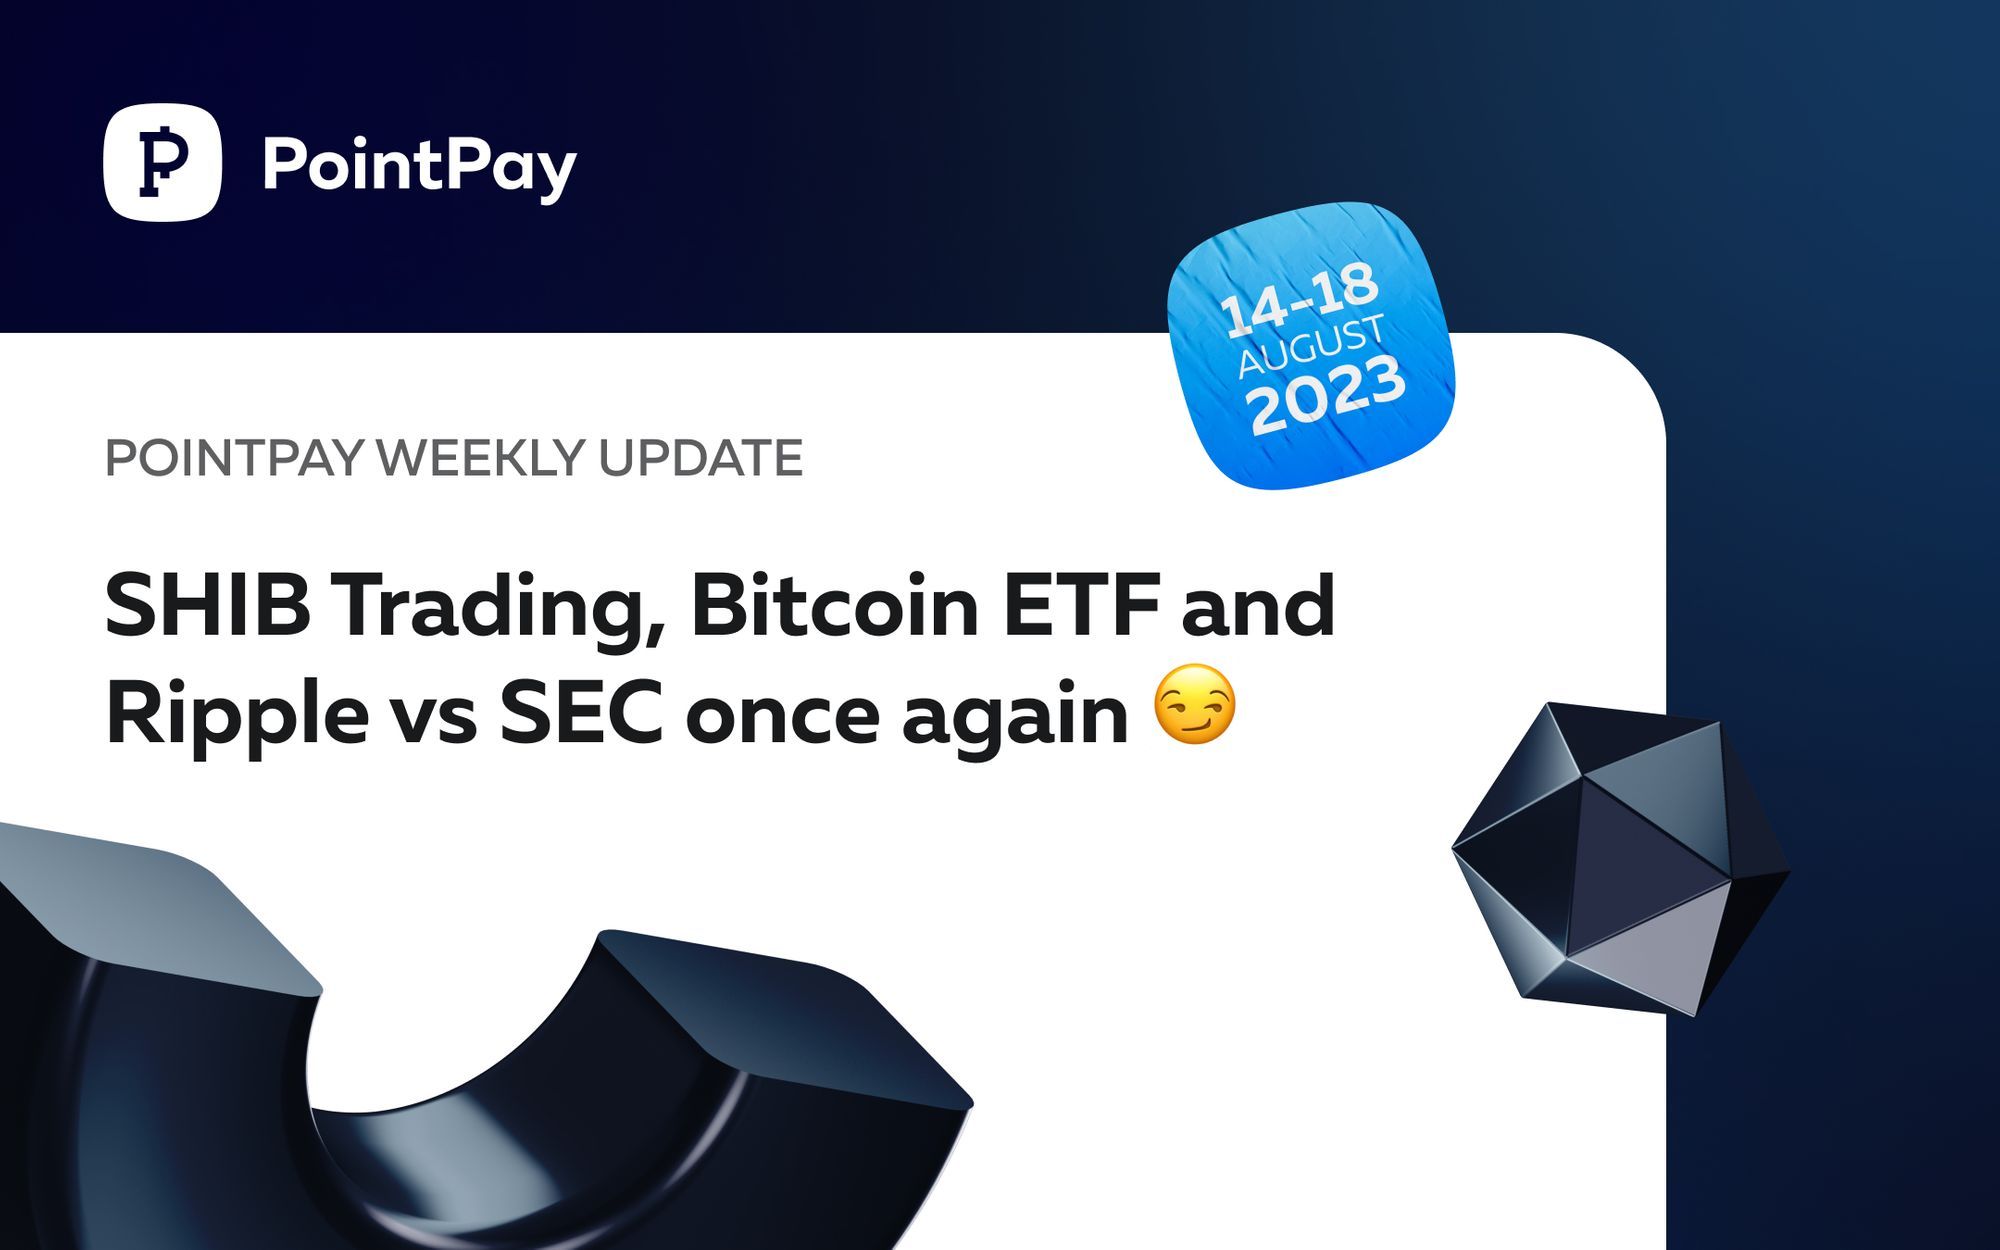 PointPay Weekly Update (14-18 August 2023)